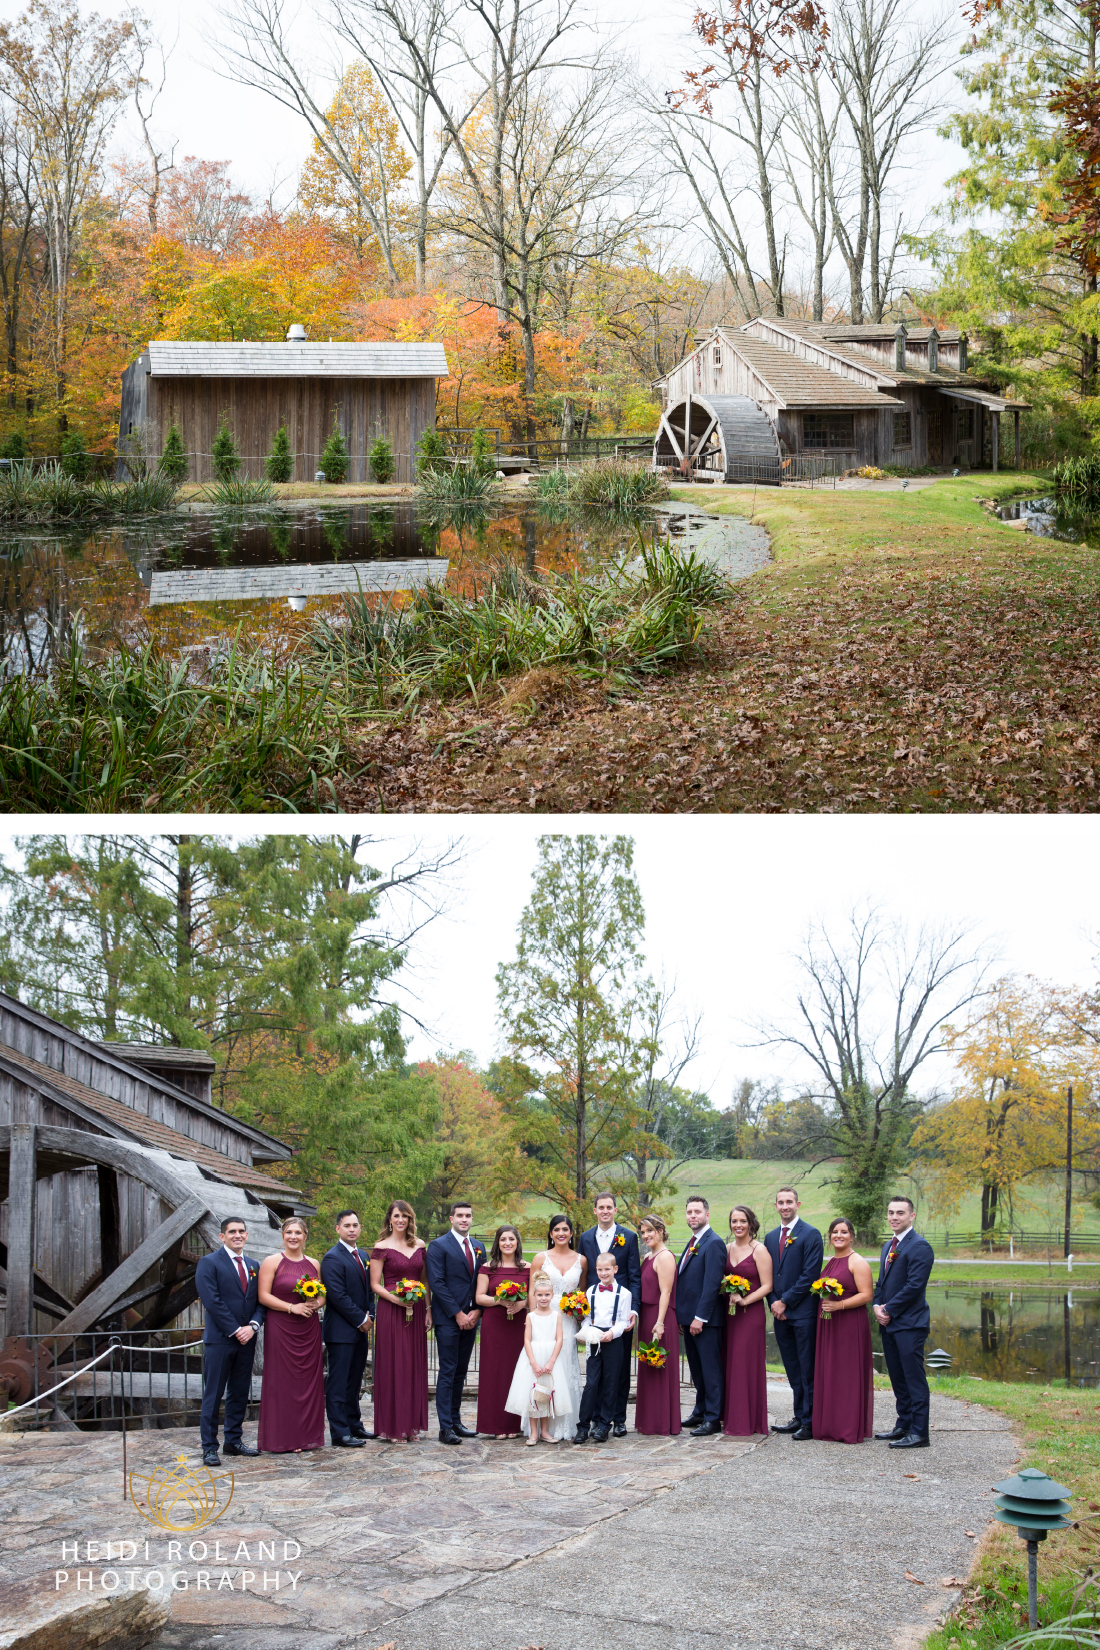  The Stone Barn Wedding Party Fall colors